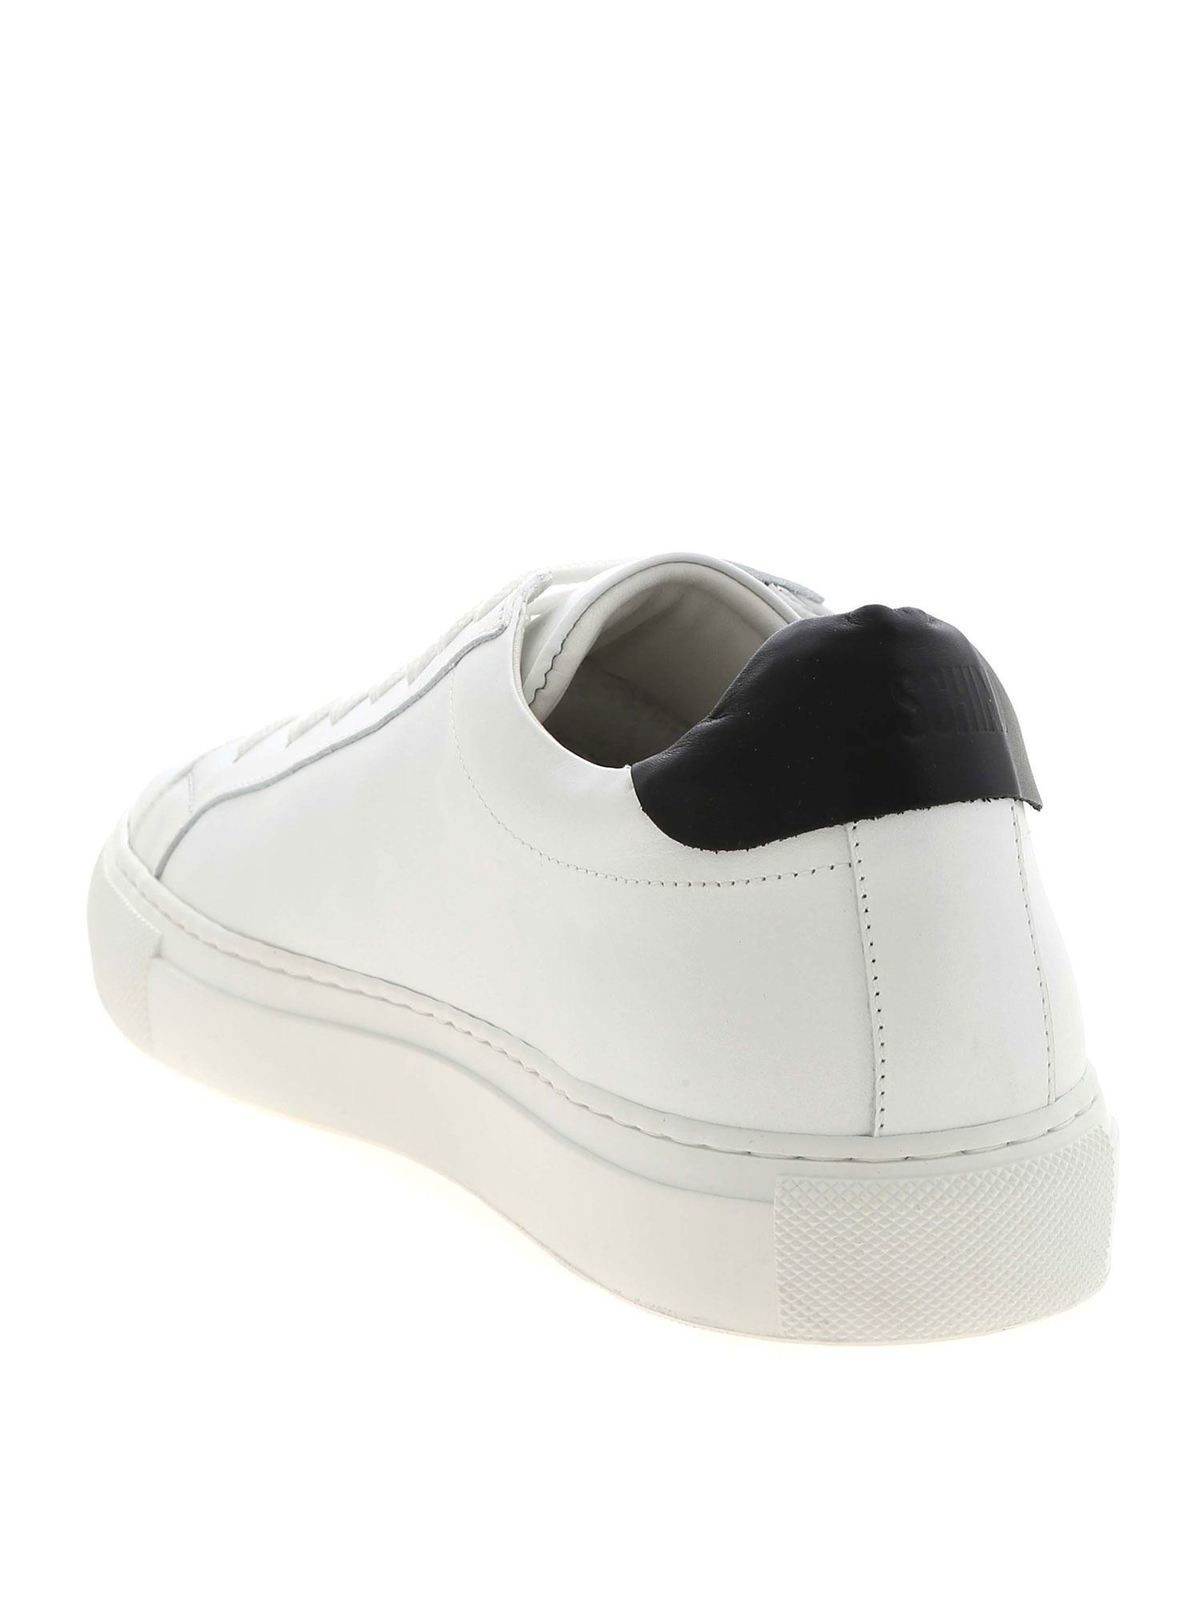 Moschino - Moschino Label sneakers in white - trainers - MB15042G1BGA110A